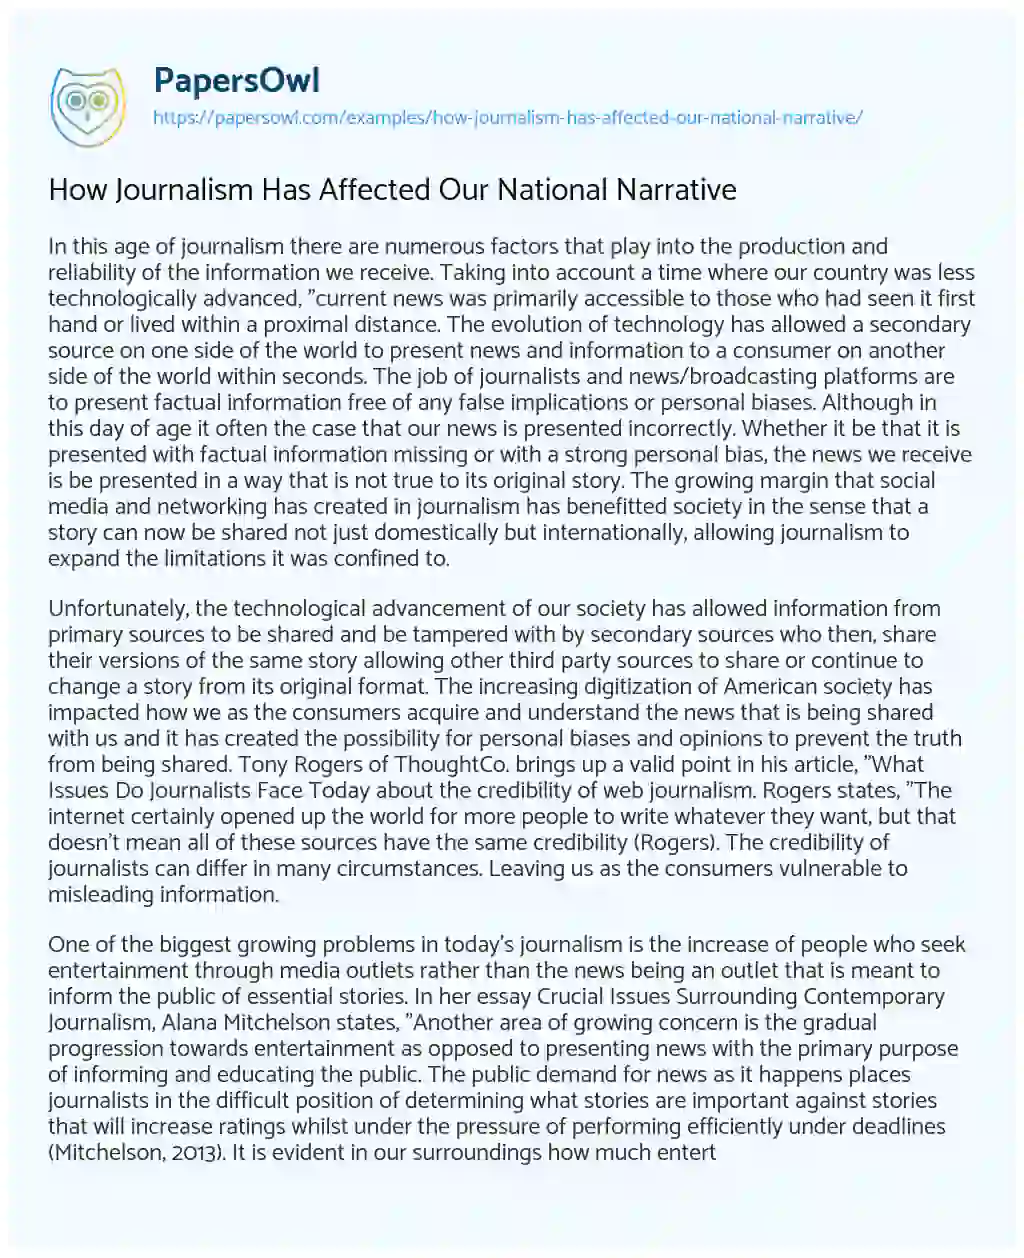 How Journalism has Affected our National Narrative essay